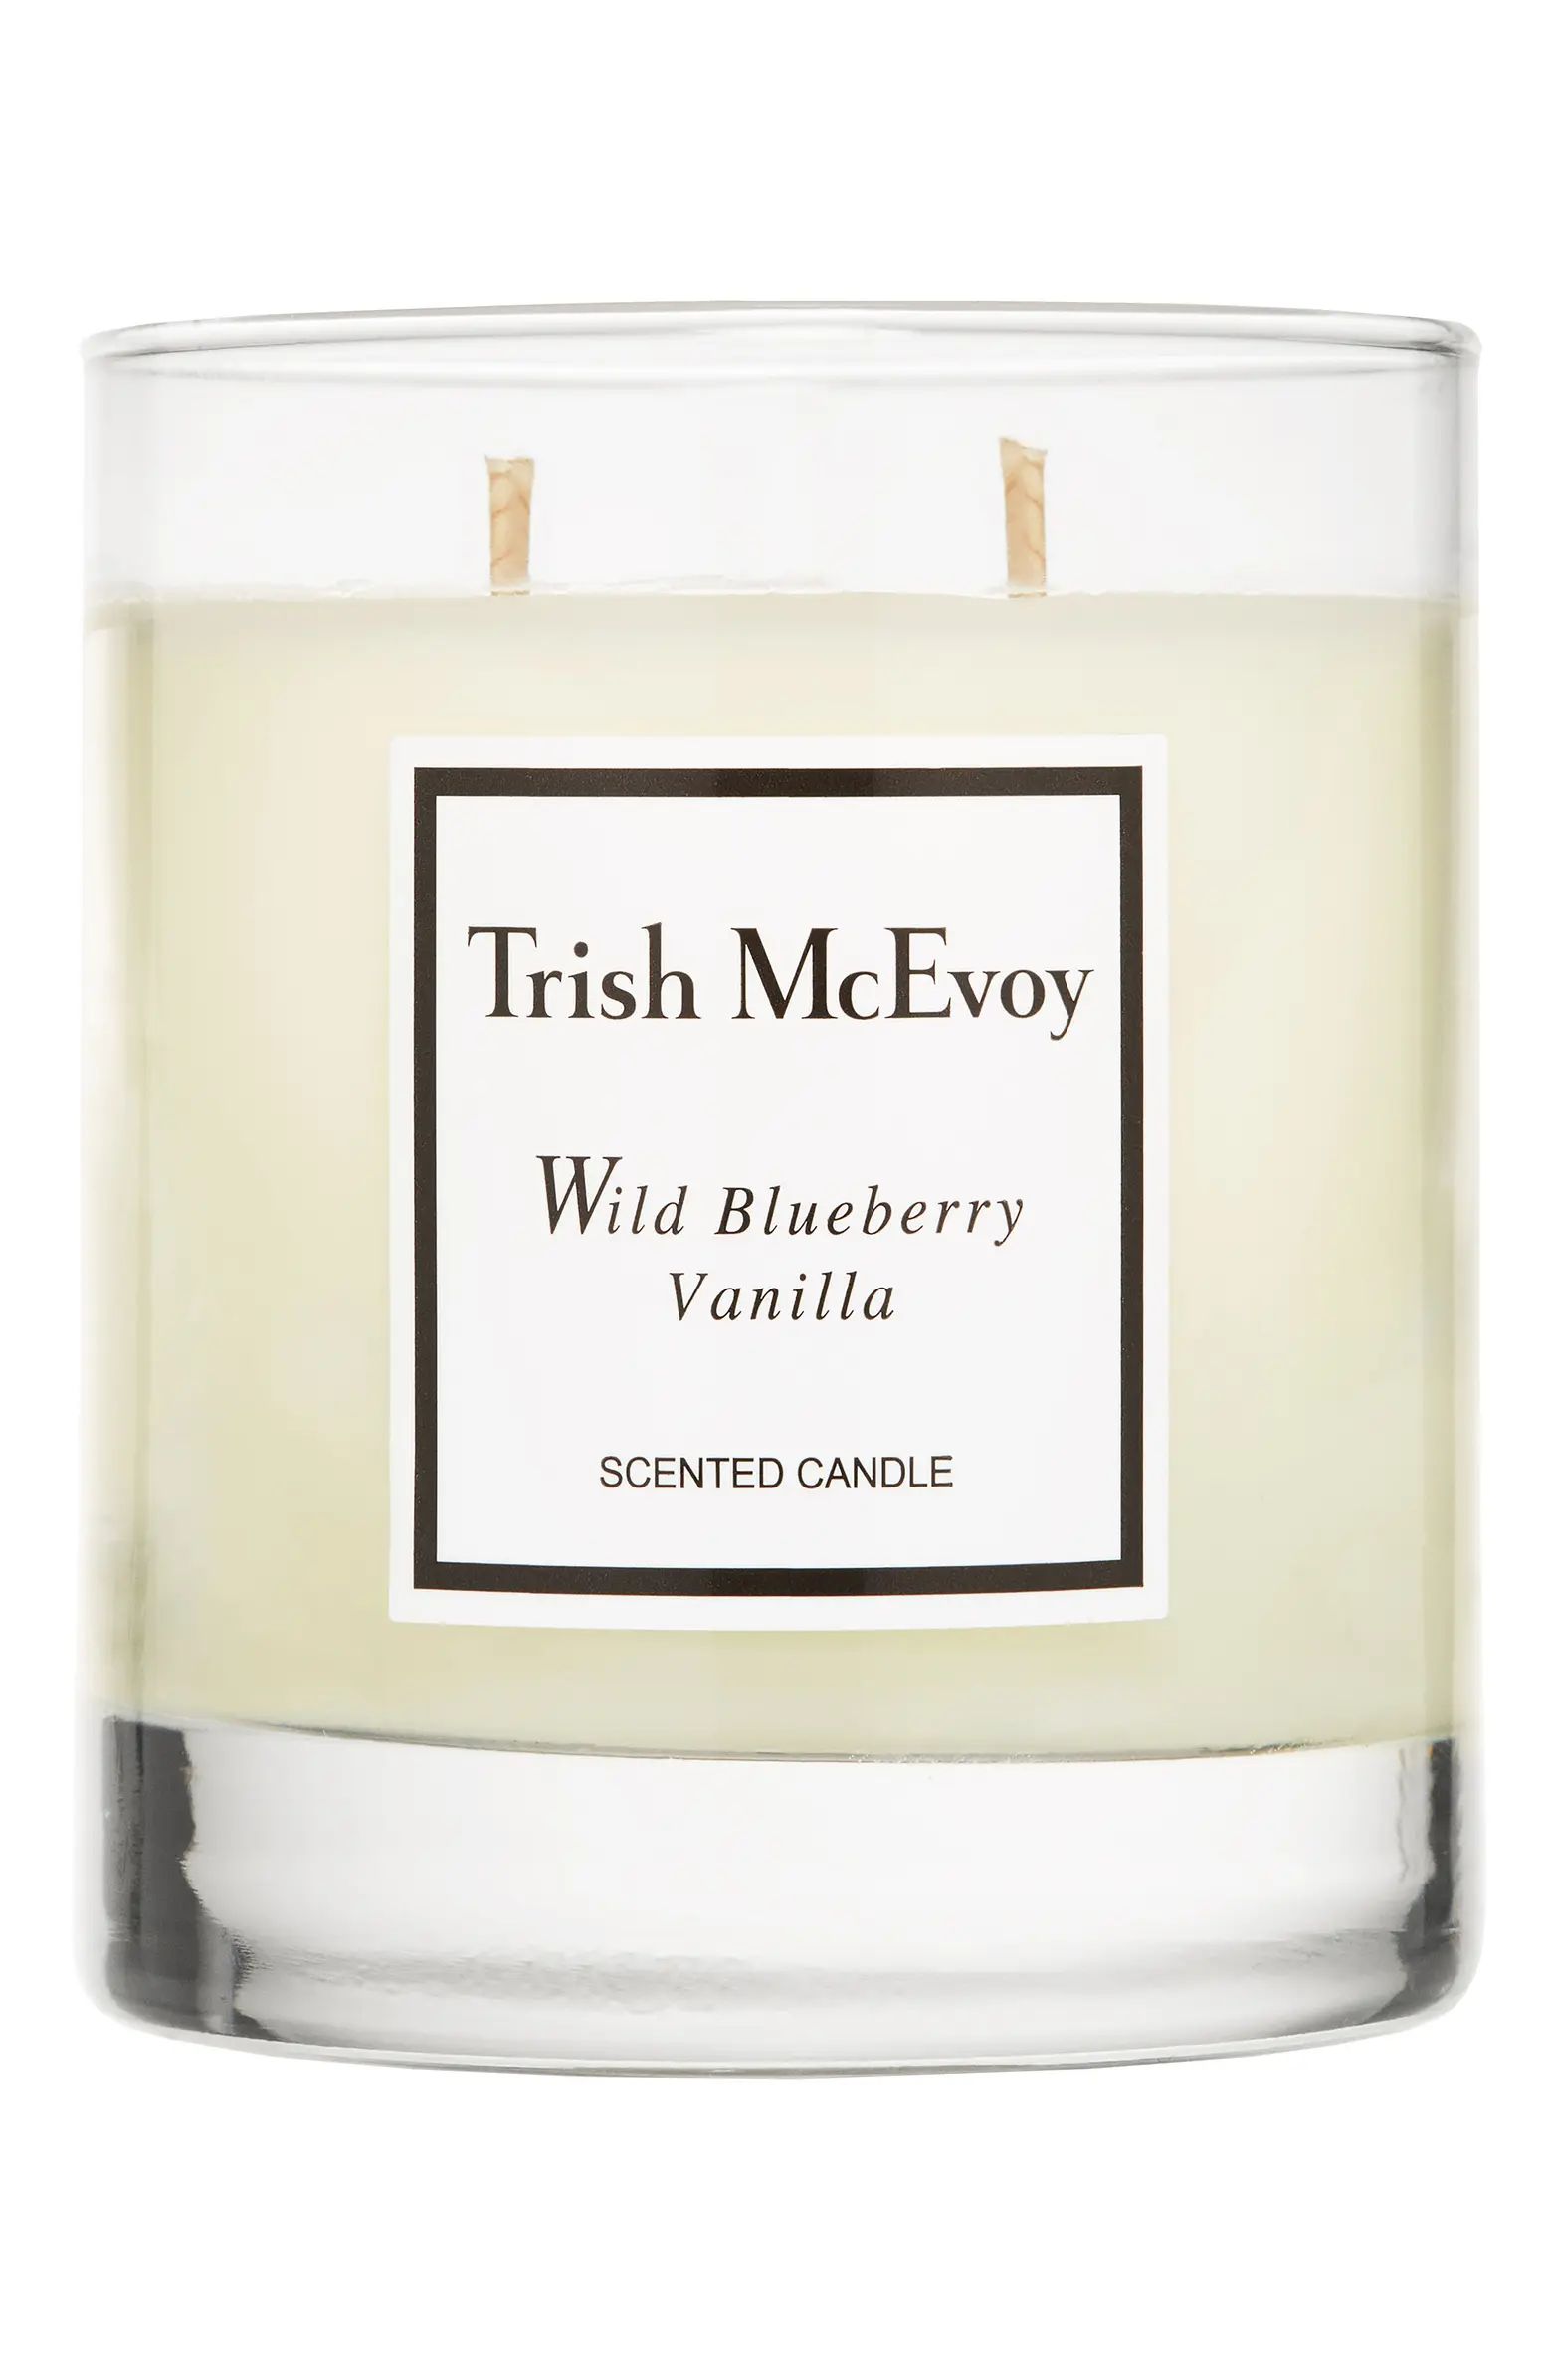 Wild Blueberry Vanilla Scented Candle | Nordstrom